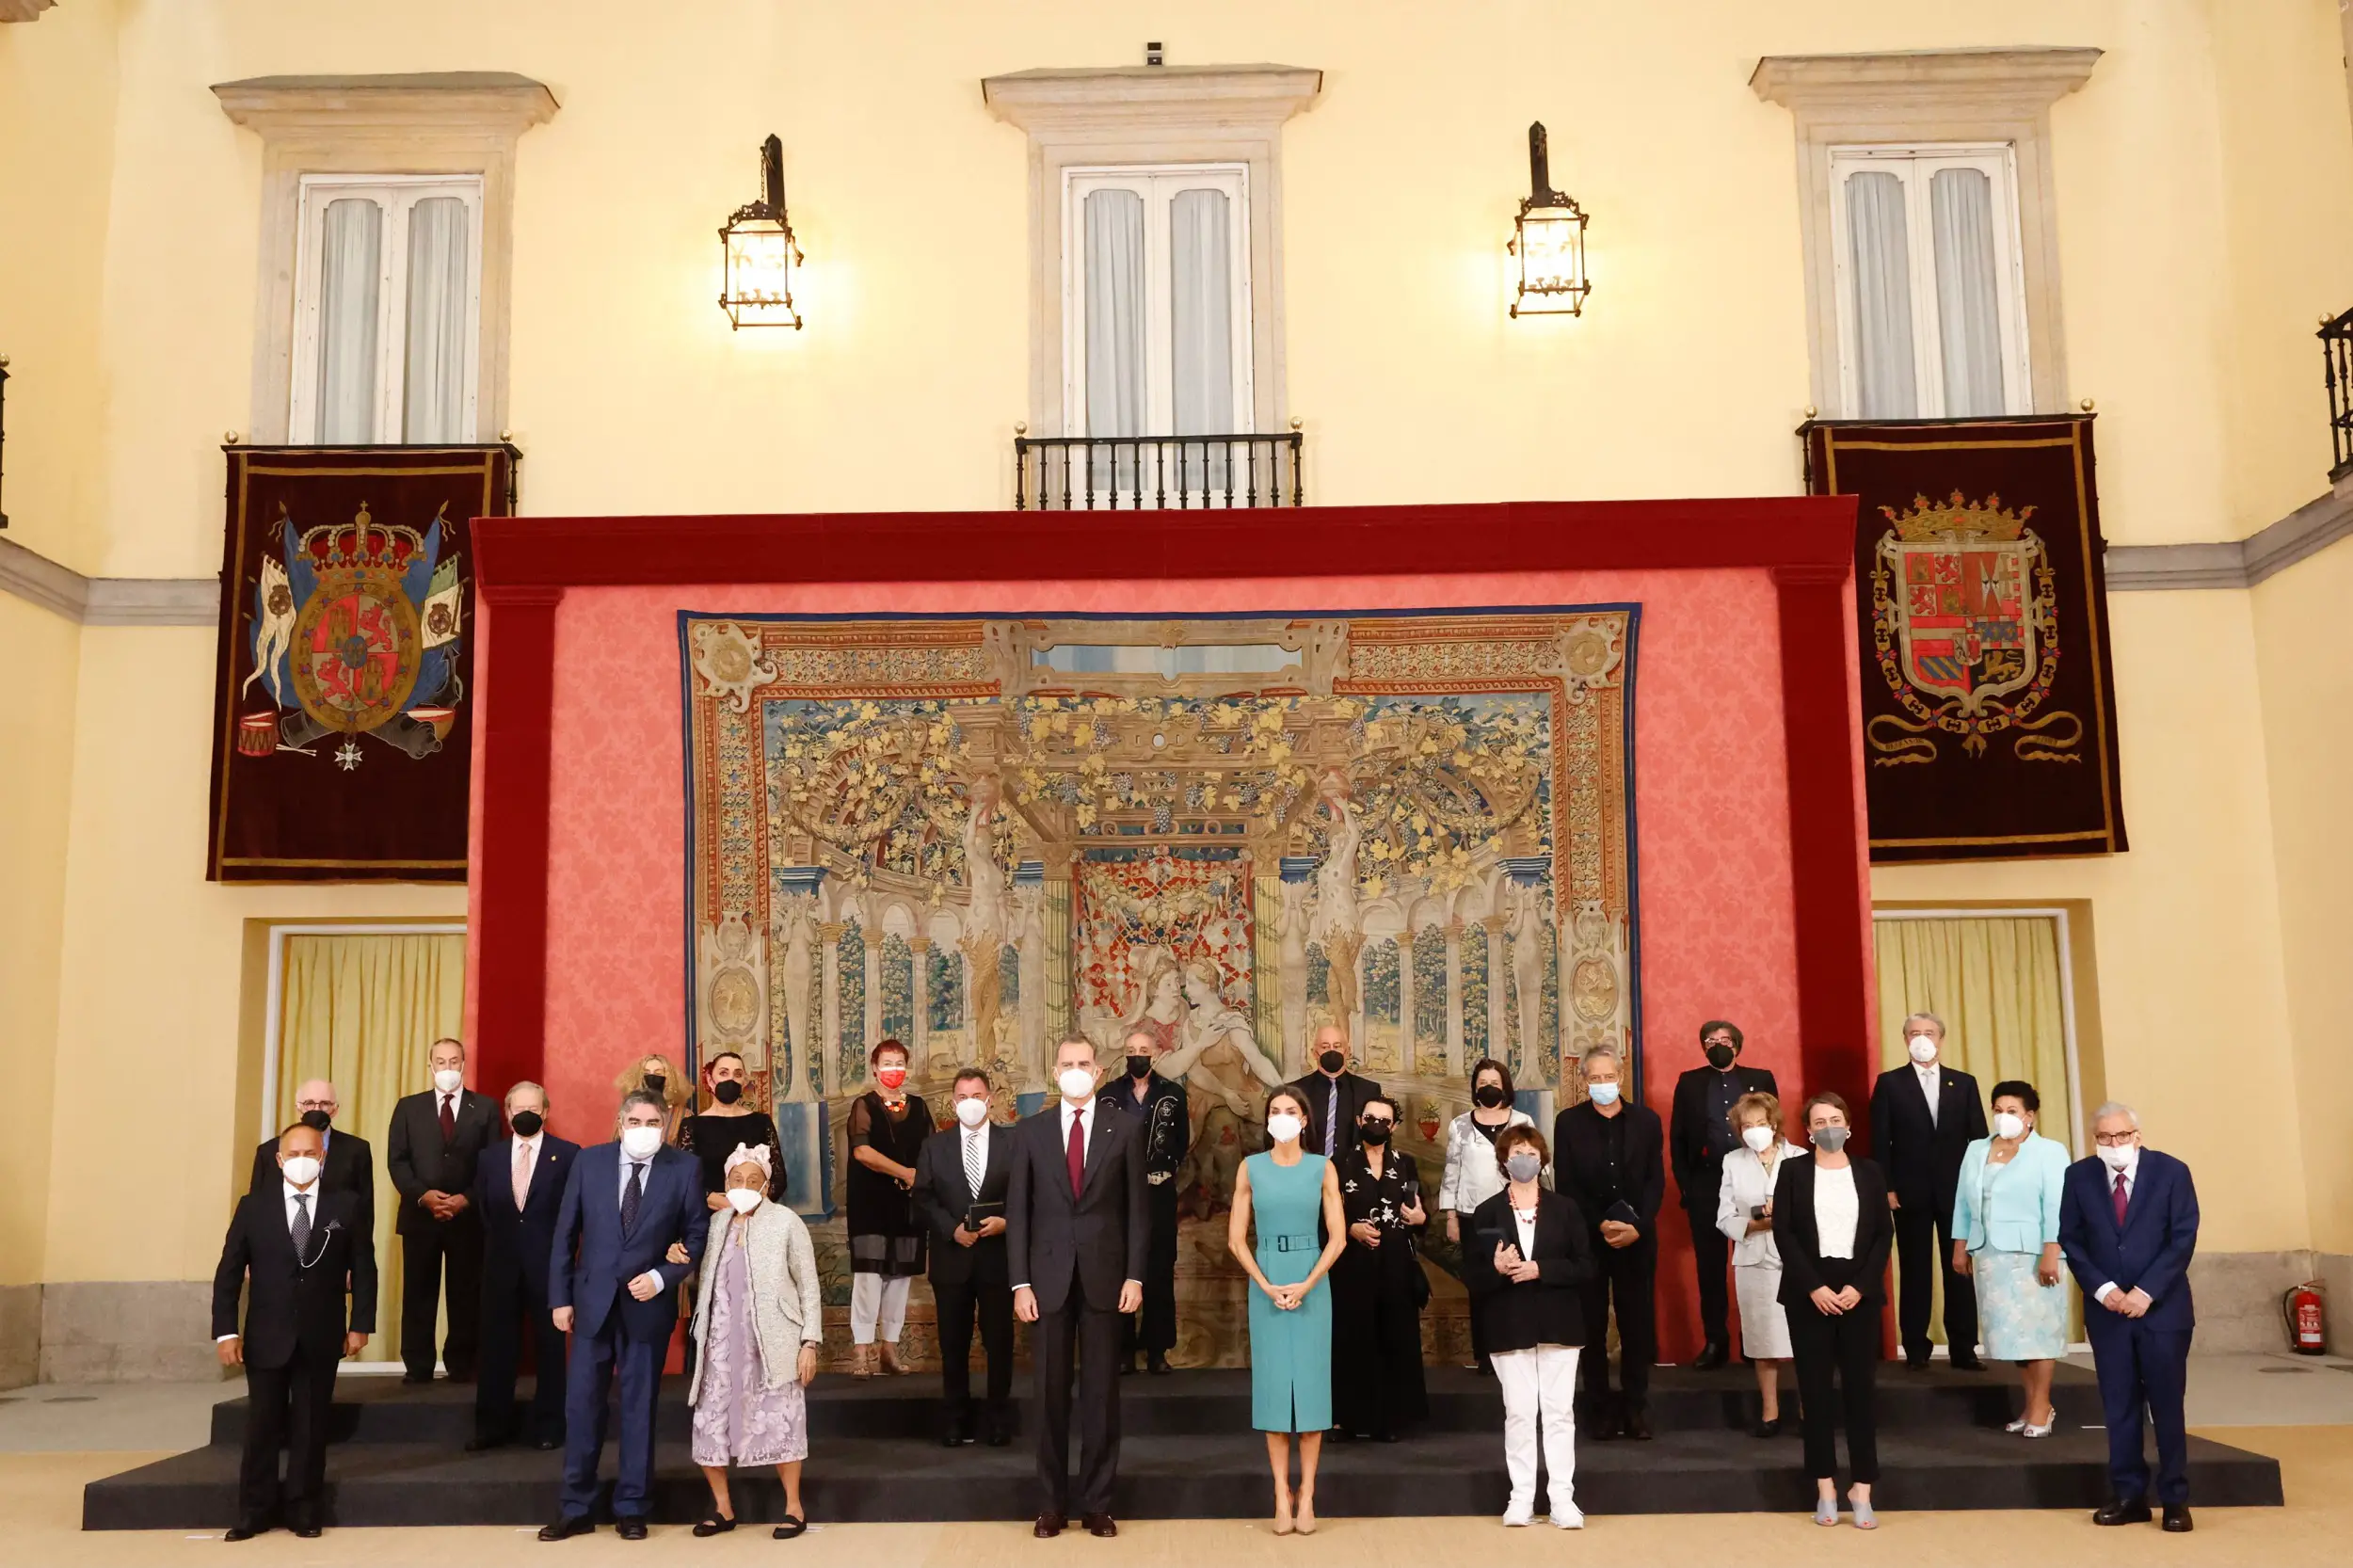 King Felipe and Queen Letizia stood for a group photograph with Fine Arts Gold Medal winners